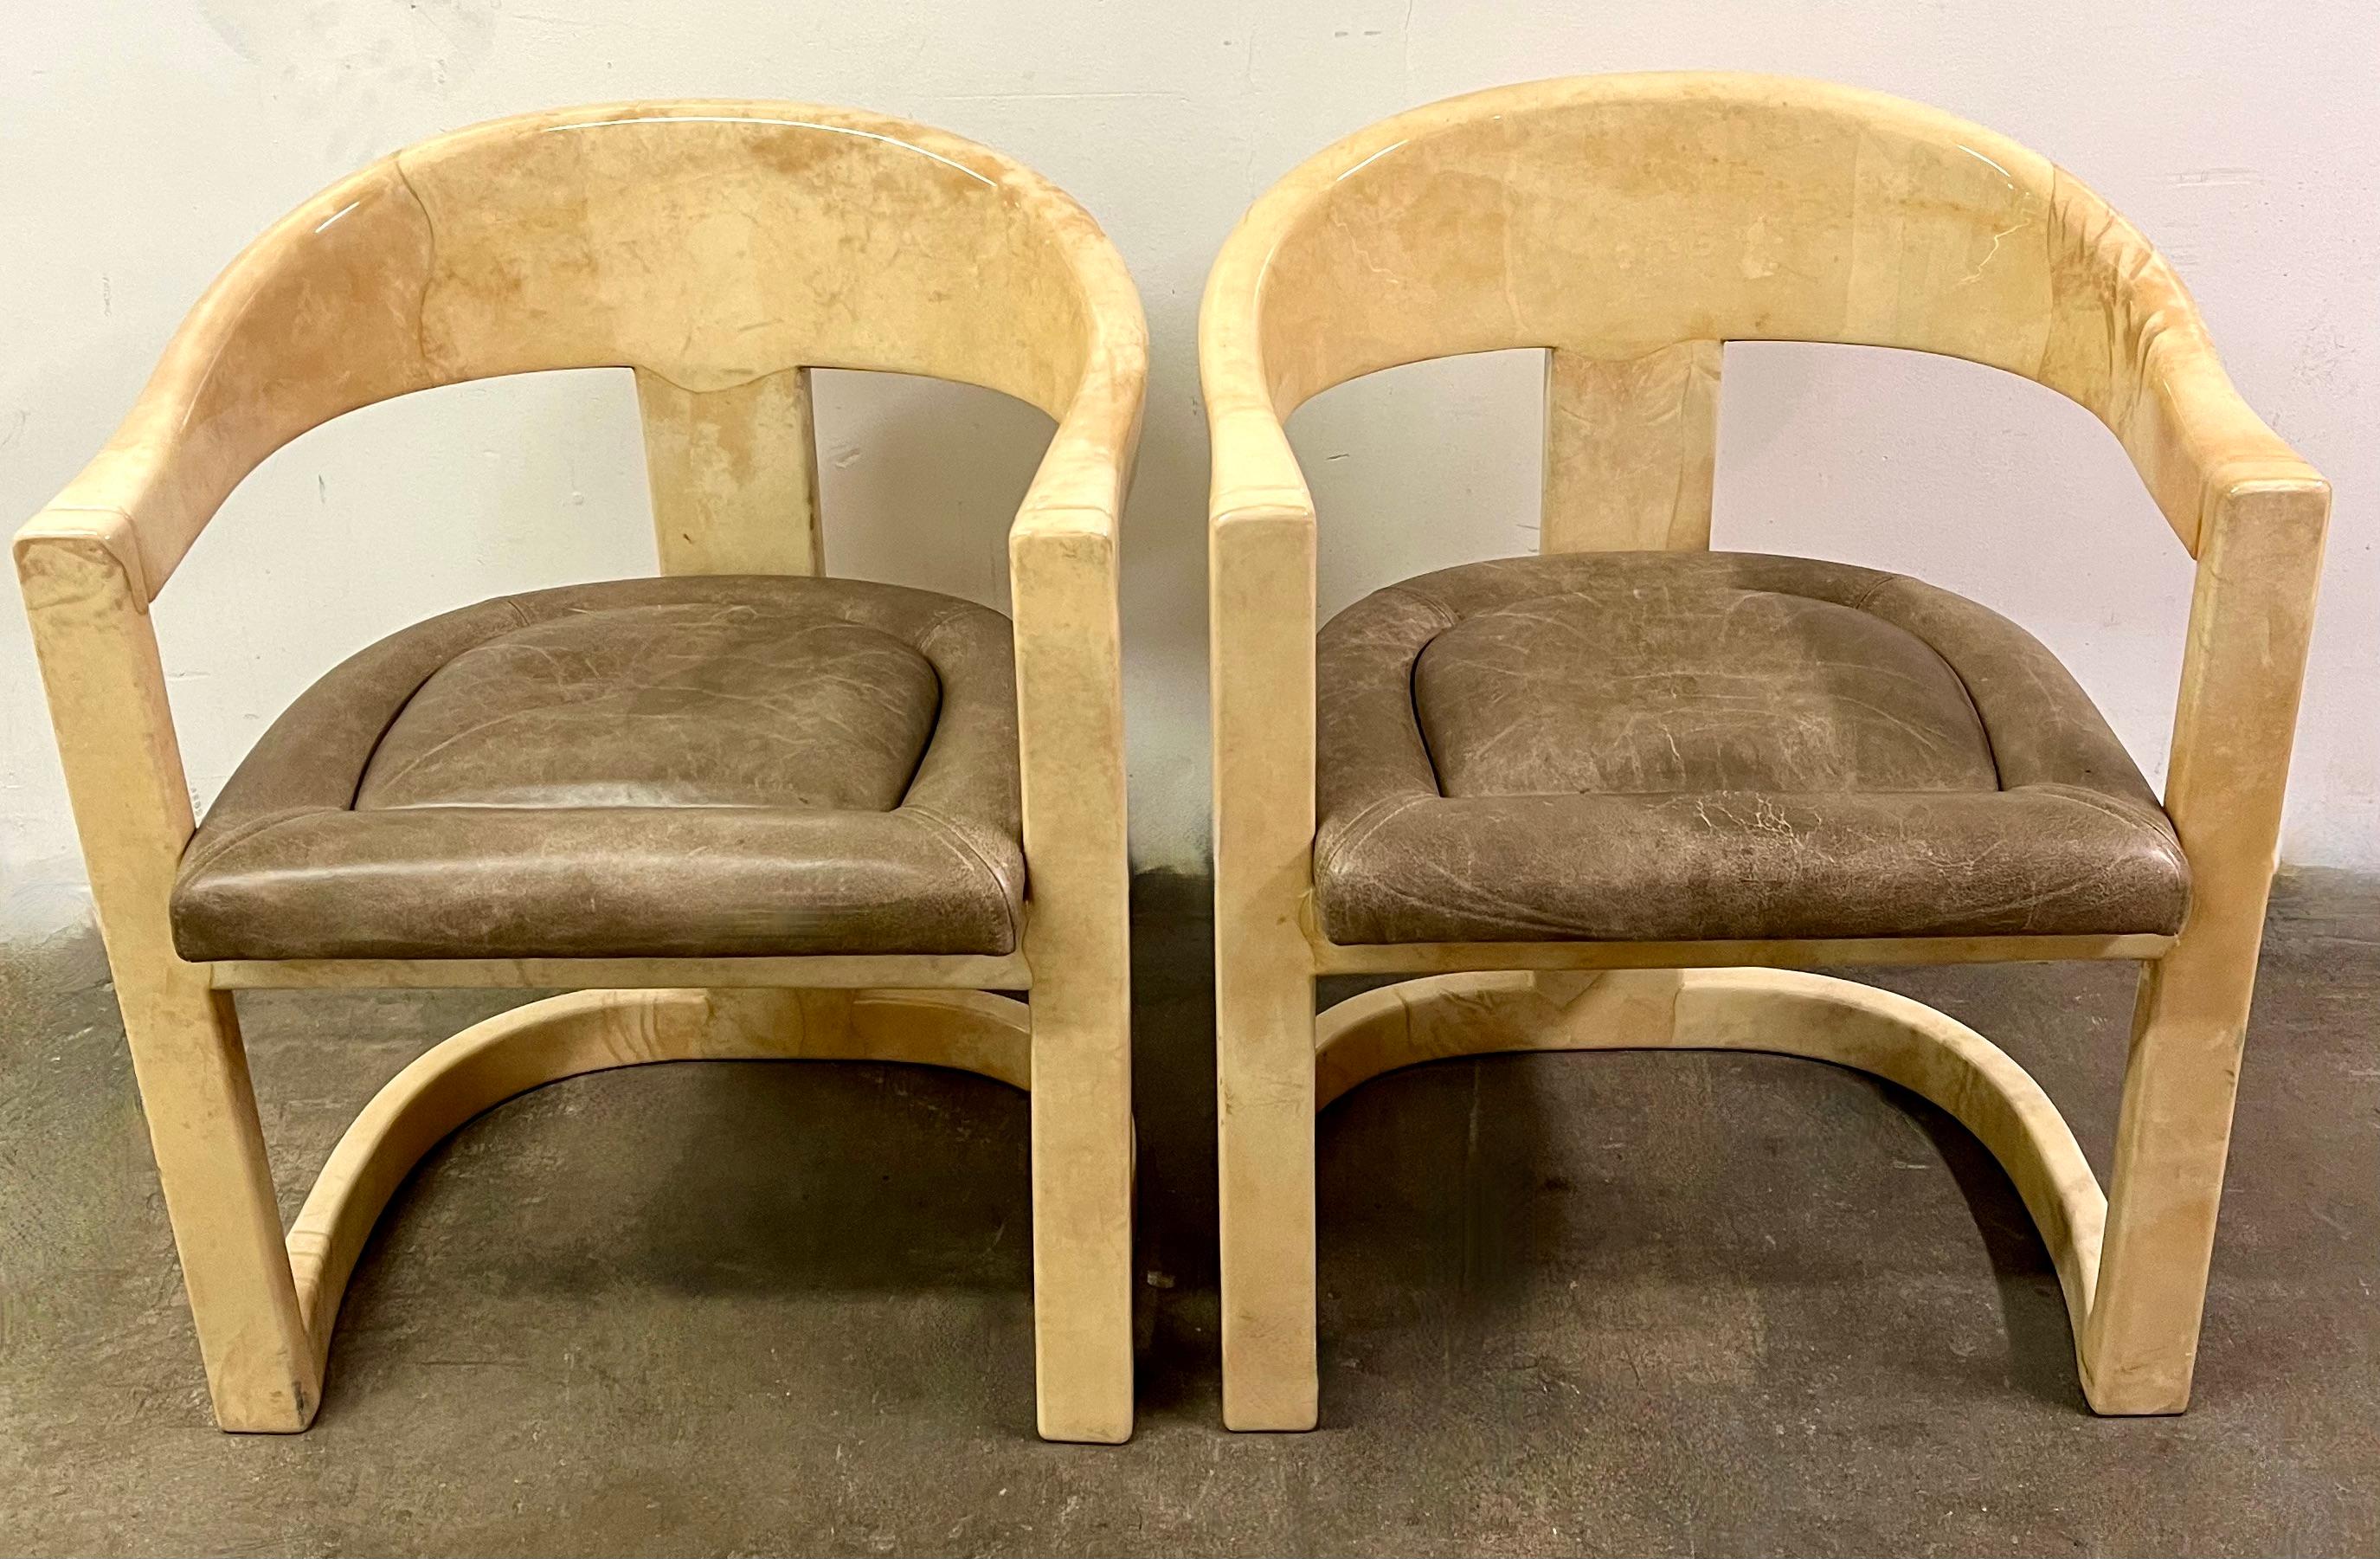 Pair of Karl Springer Goatskin Onassis Chairs with Leather Upholstered Seats For Sale 1